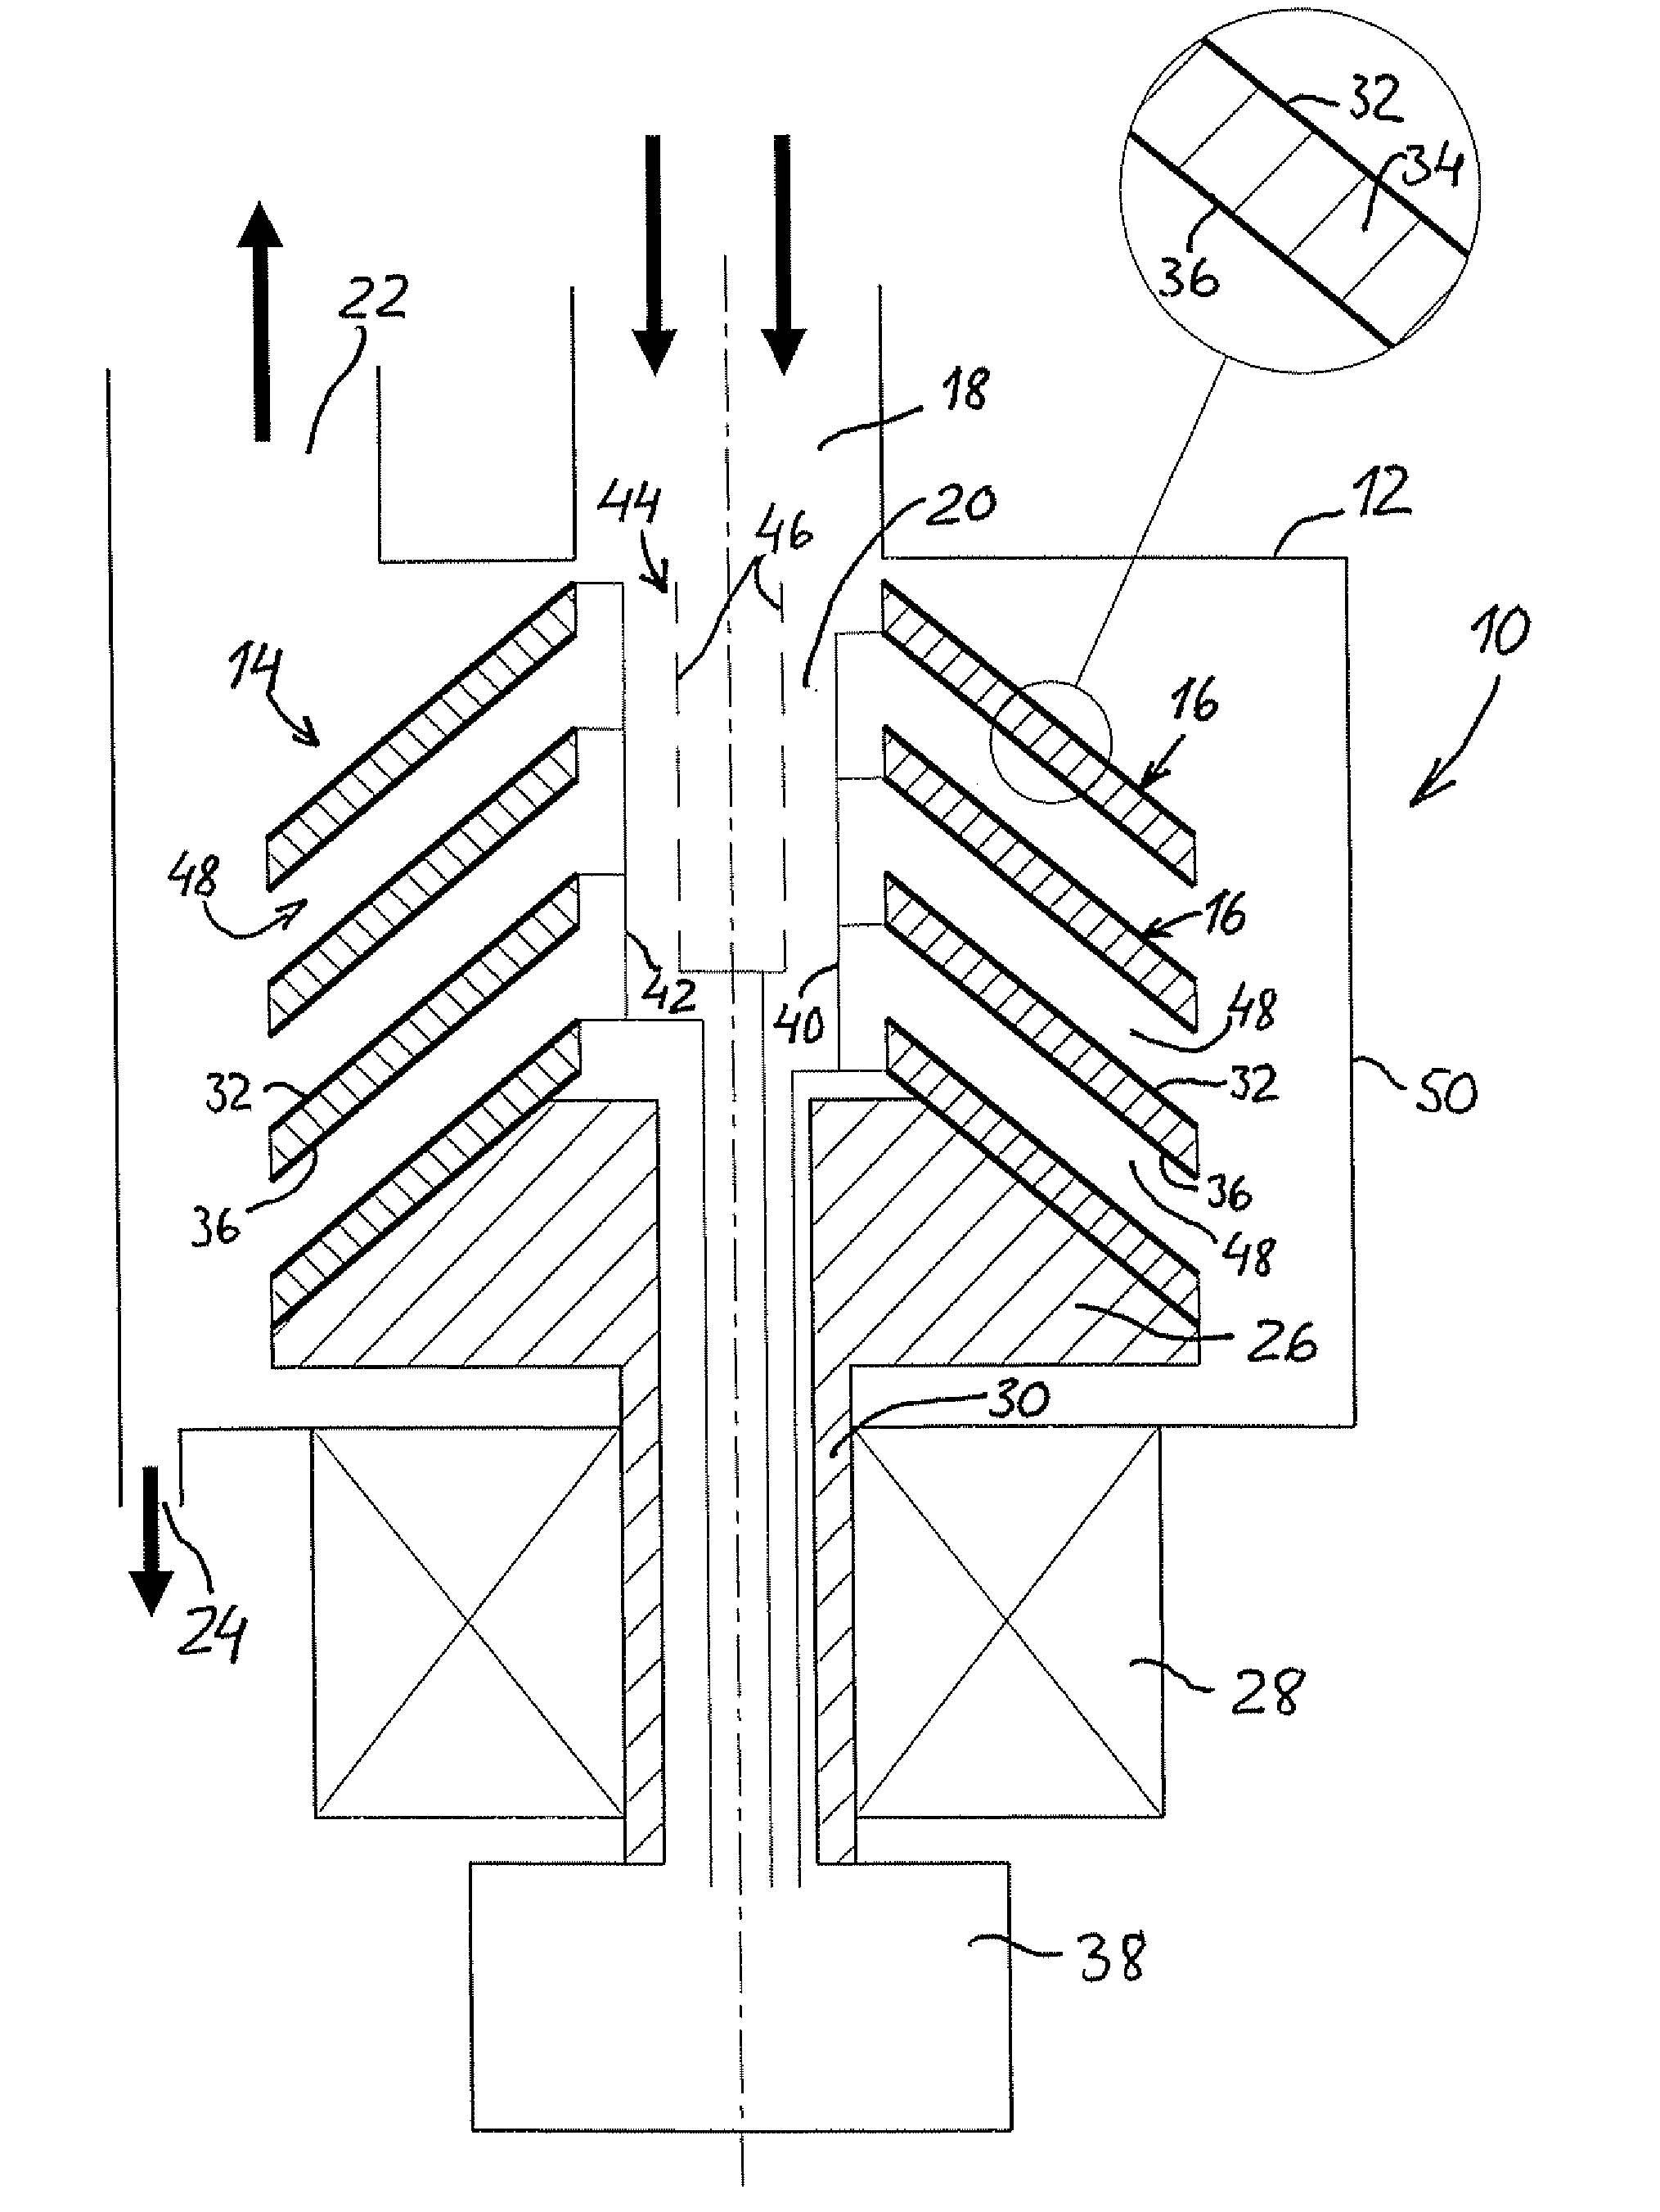 Method and Apparatus for Separation of Particles From a Flow of Gas